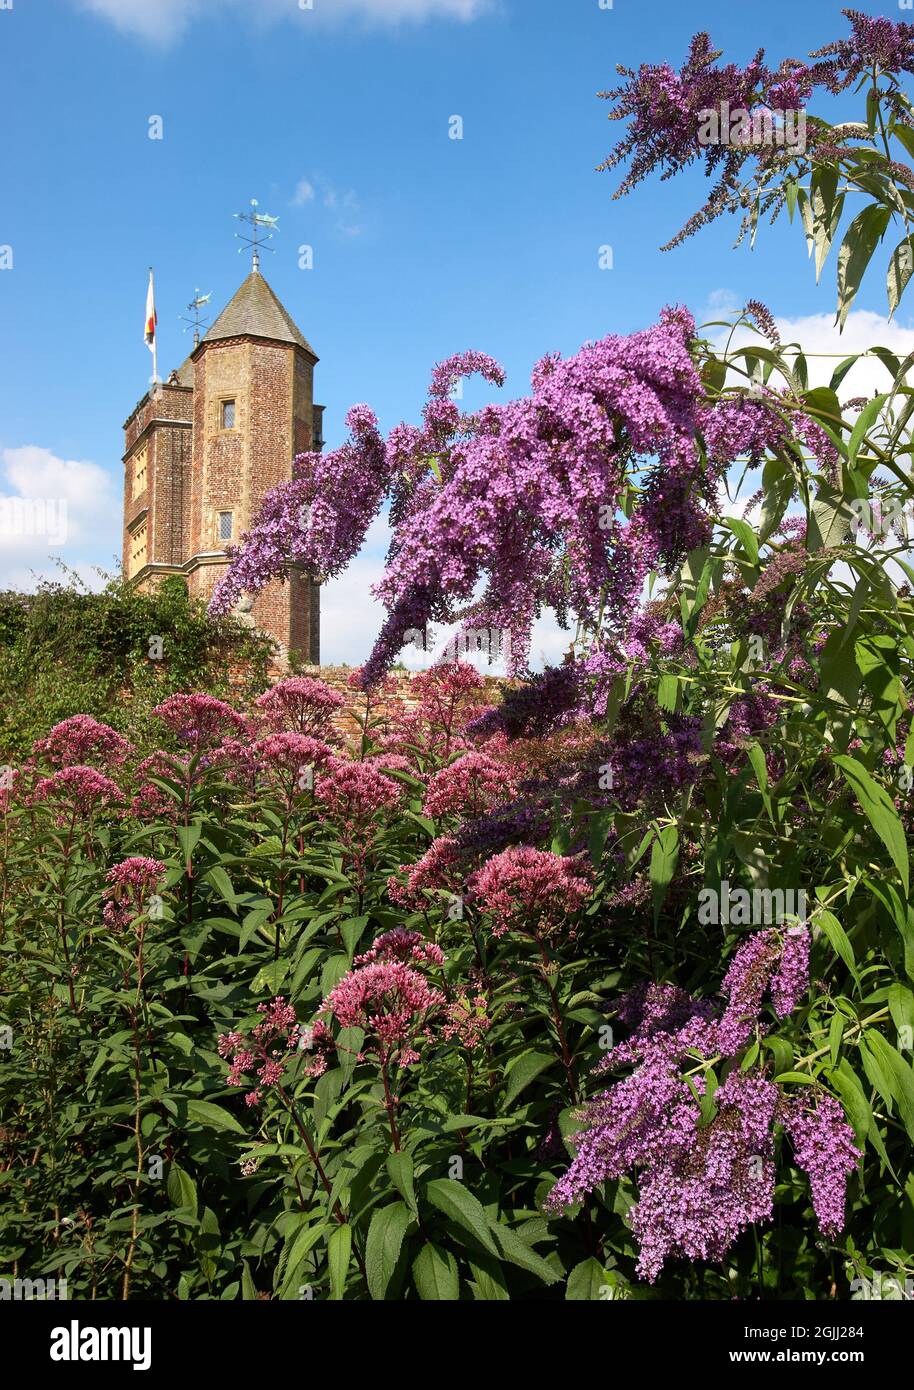 The Elizabethan Tower and lawns at Vita Sackville West and Harold Nicholson's garden at Sissinghurst Kent UK Stock Photo